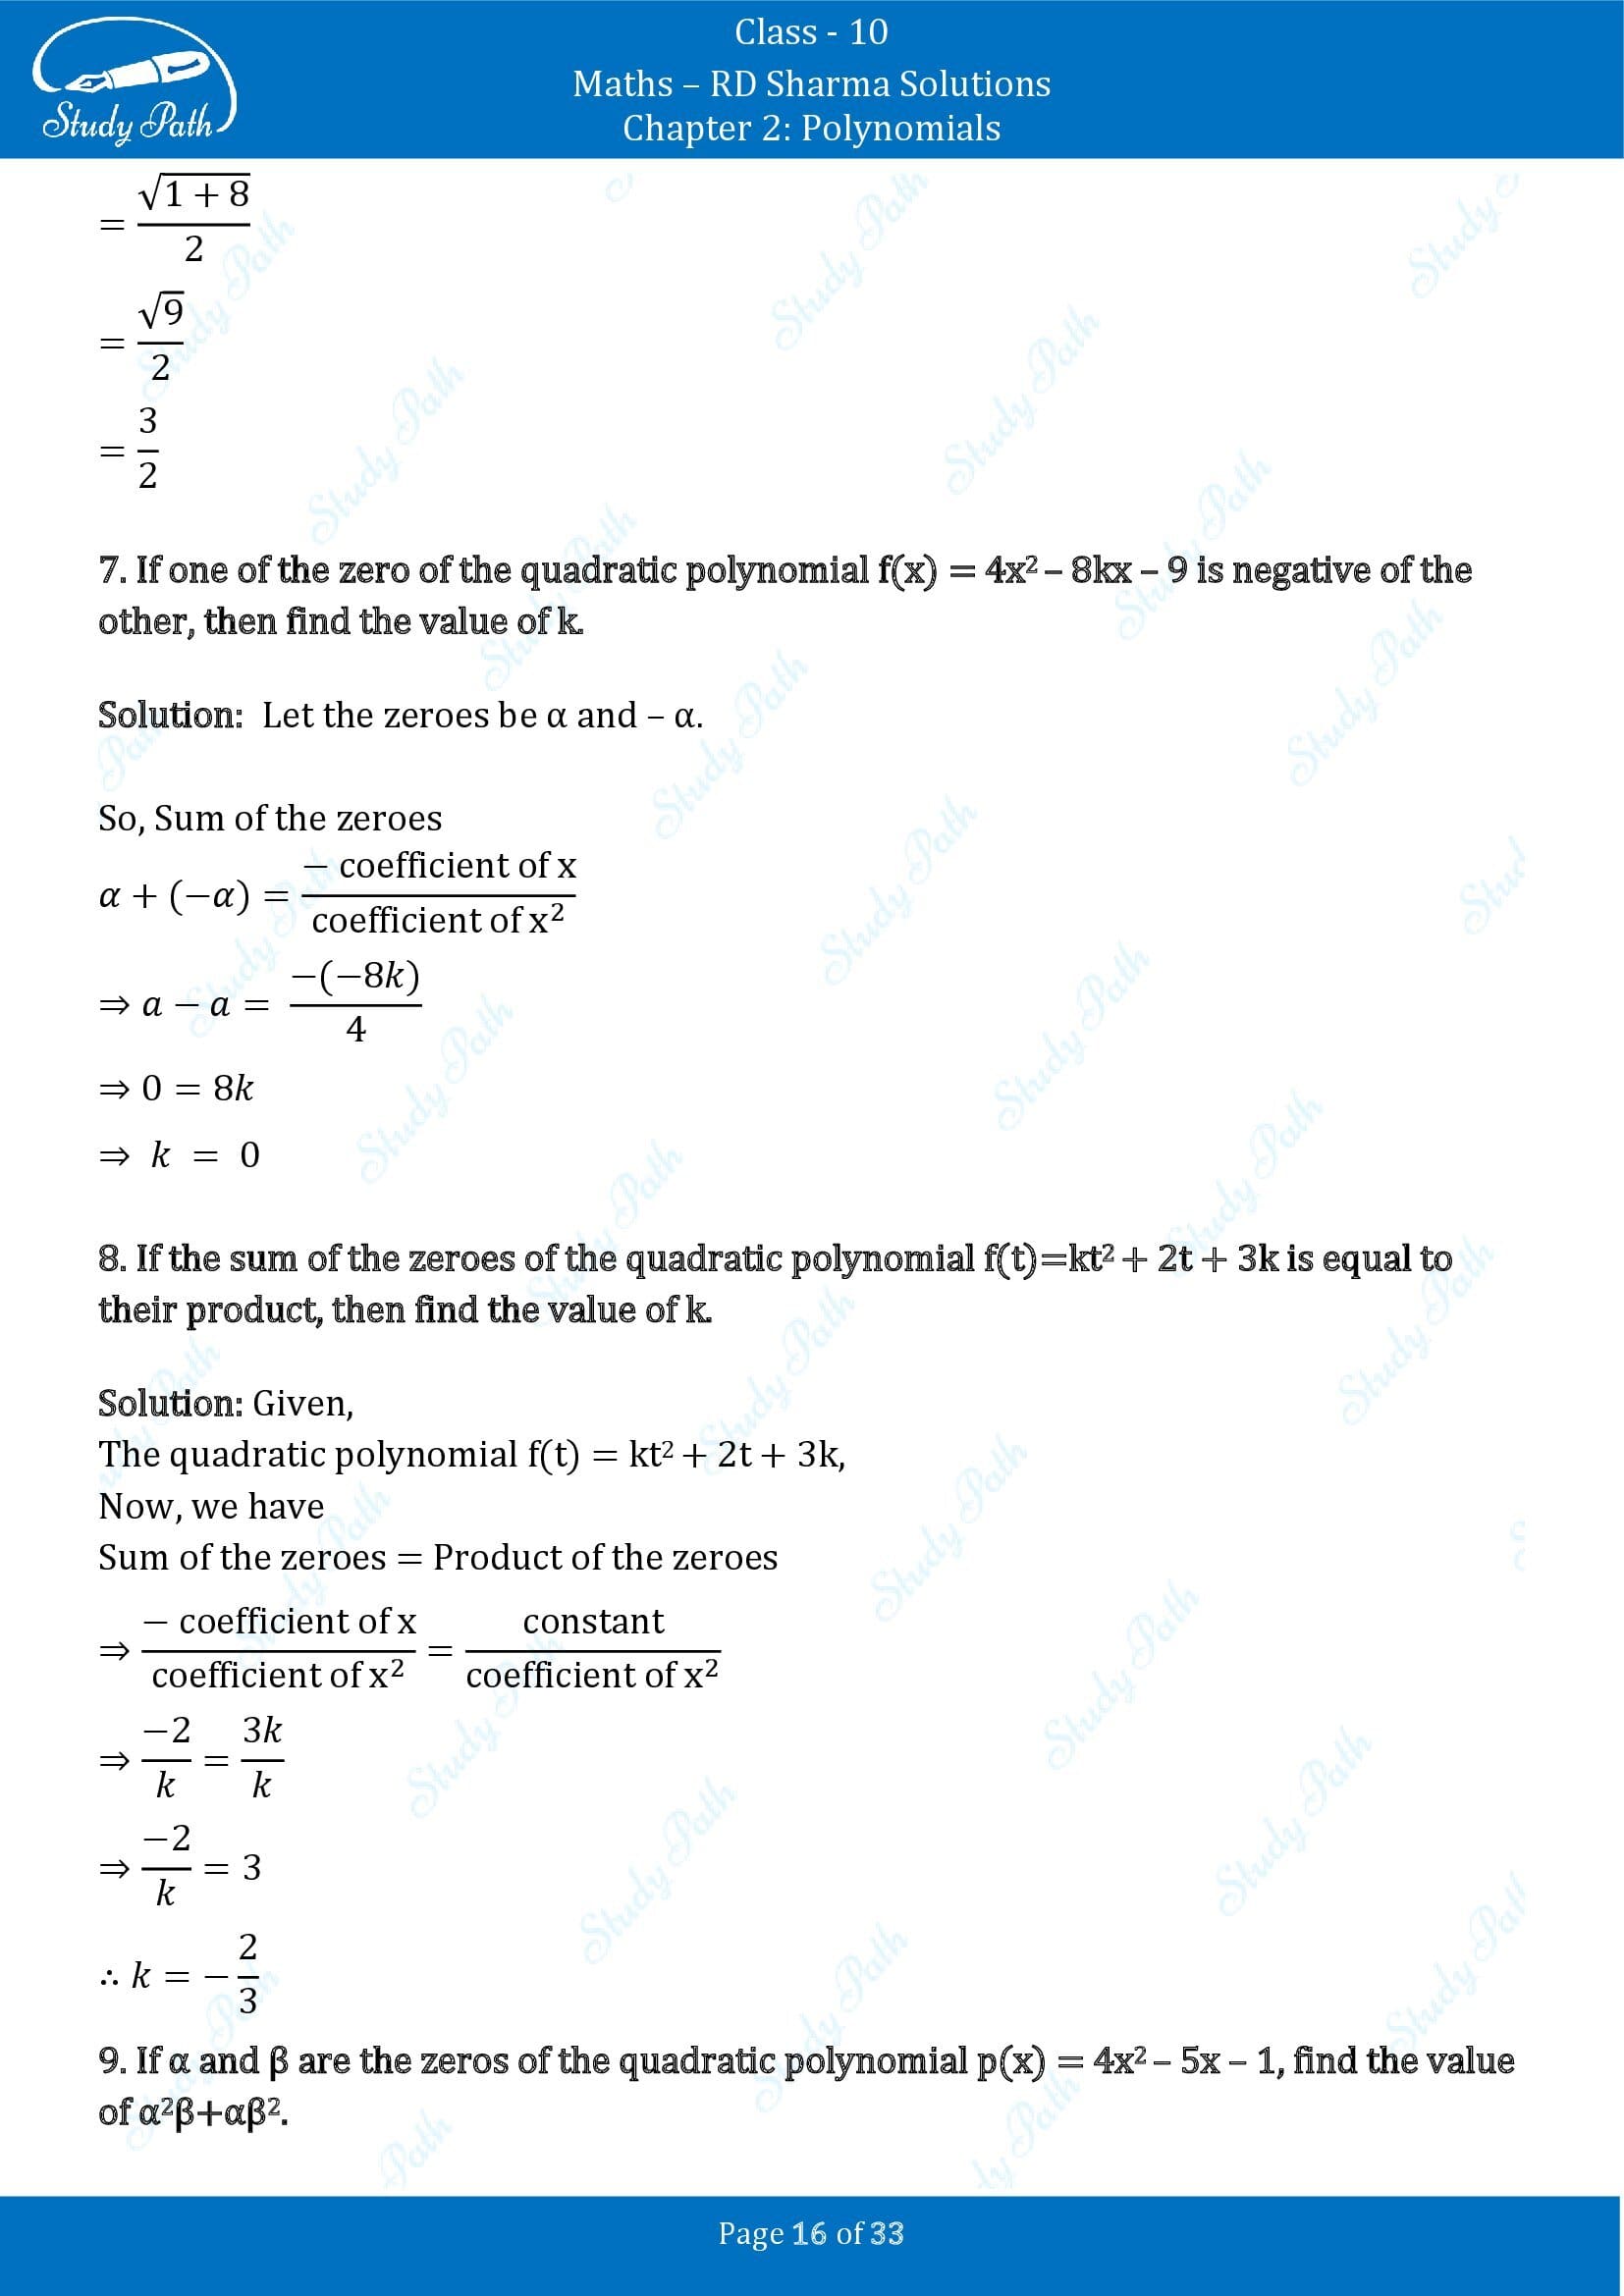 RD Sharma Solutions Class 10 Chapter 2 Polynomials Exercise 2.1 00016